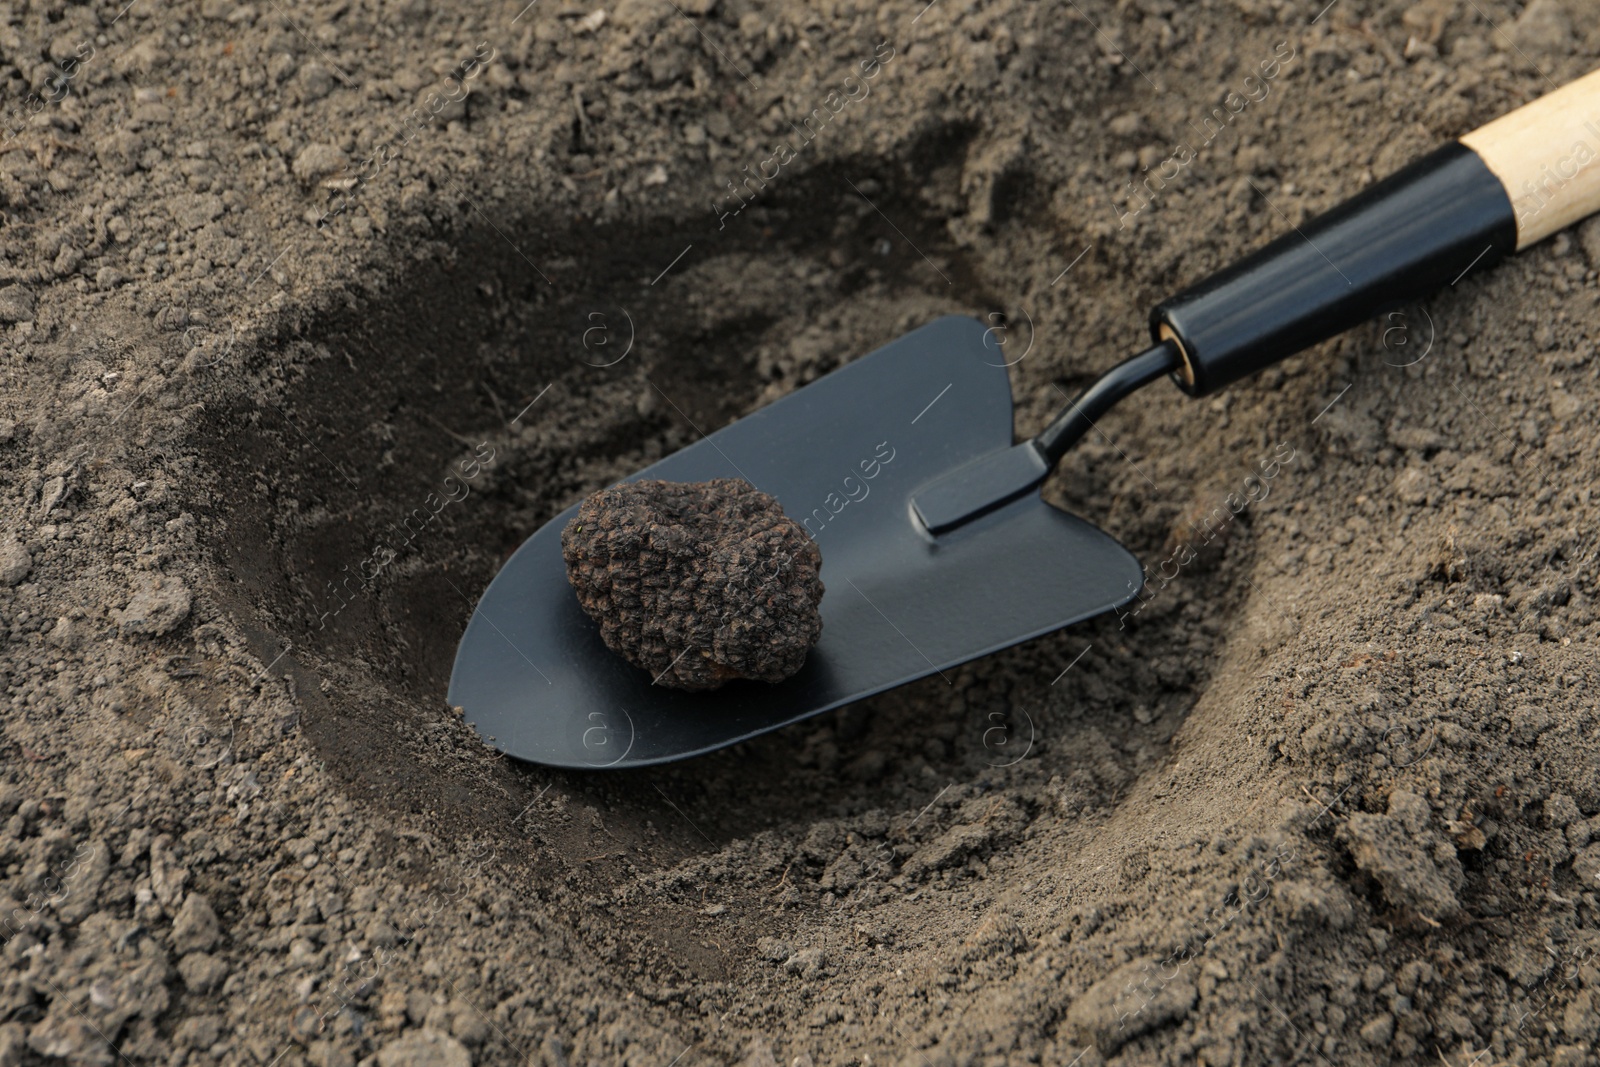 Photo of Shovel with fresh truffle in pit, closeup view